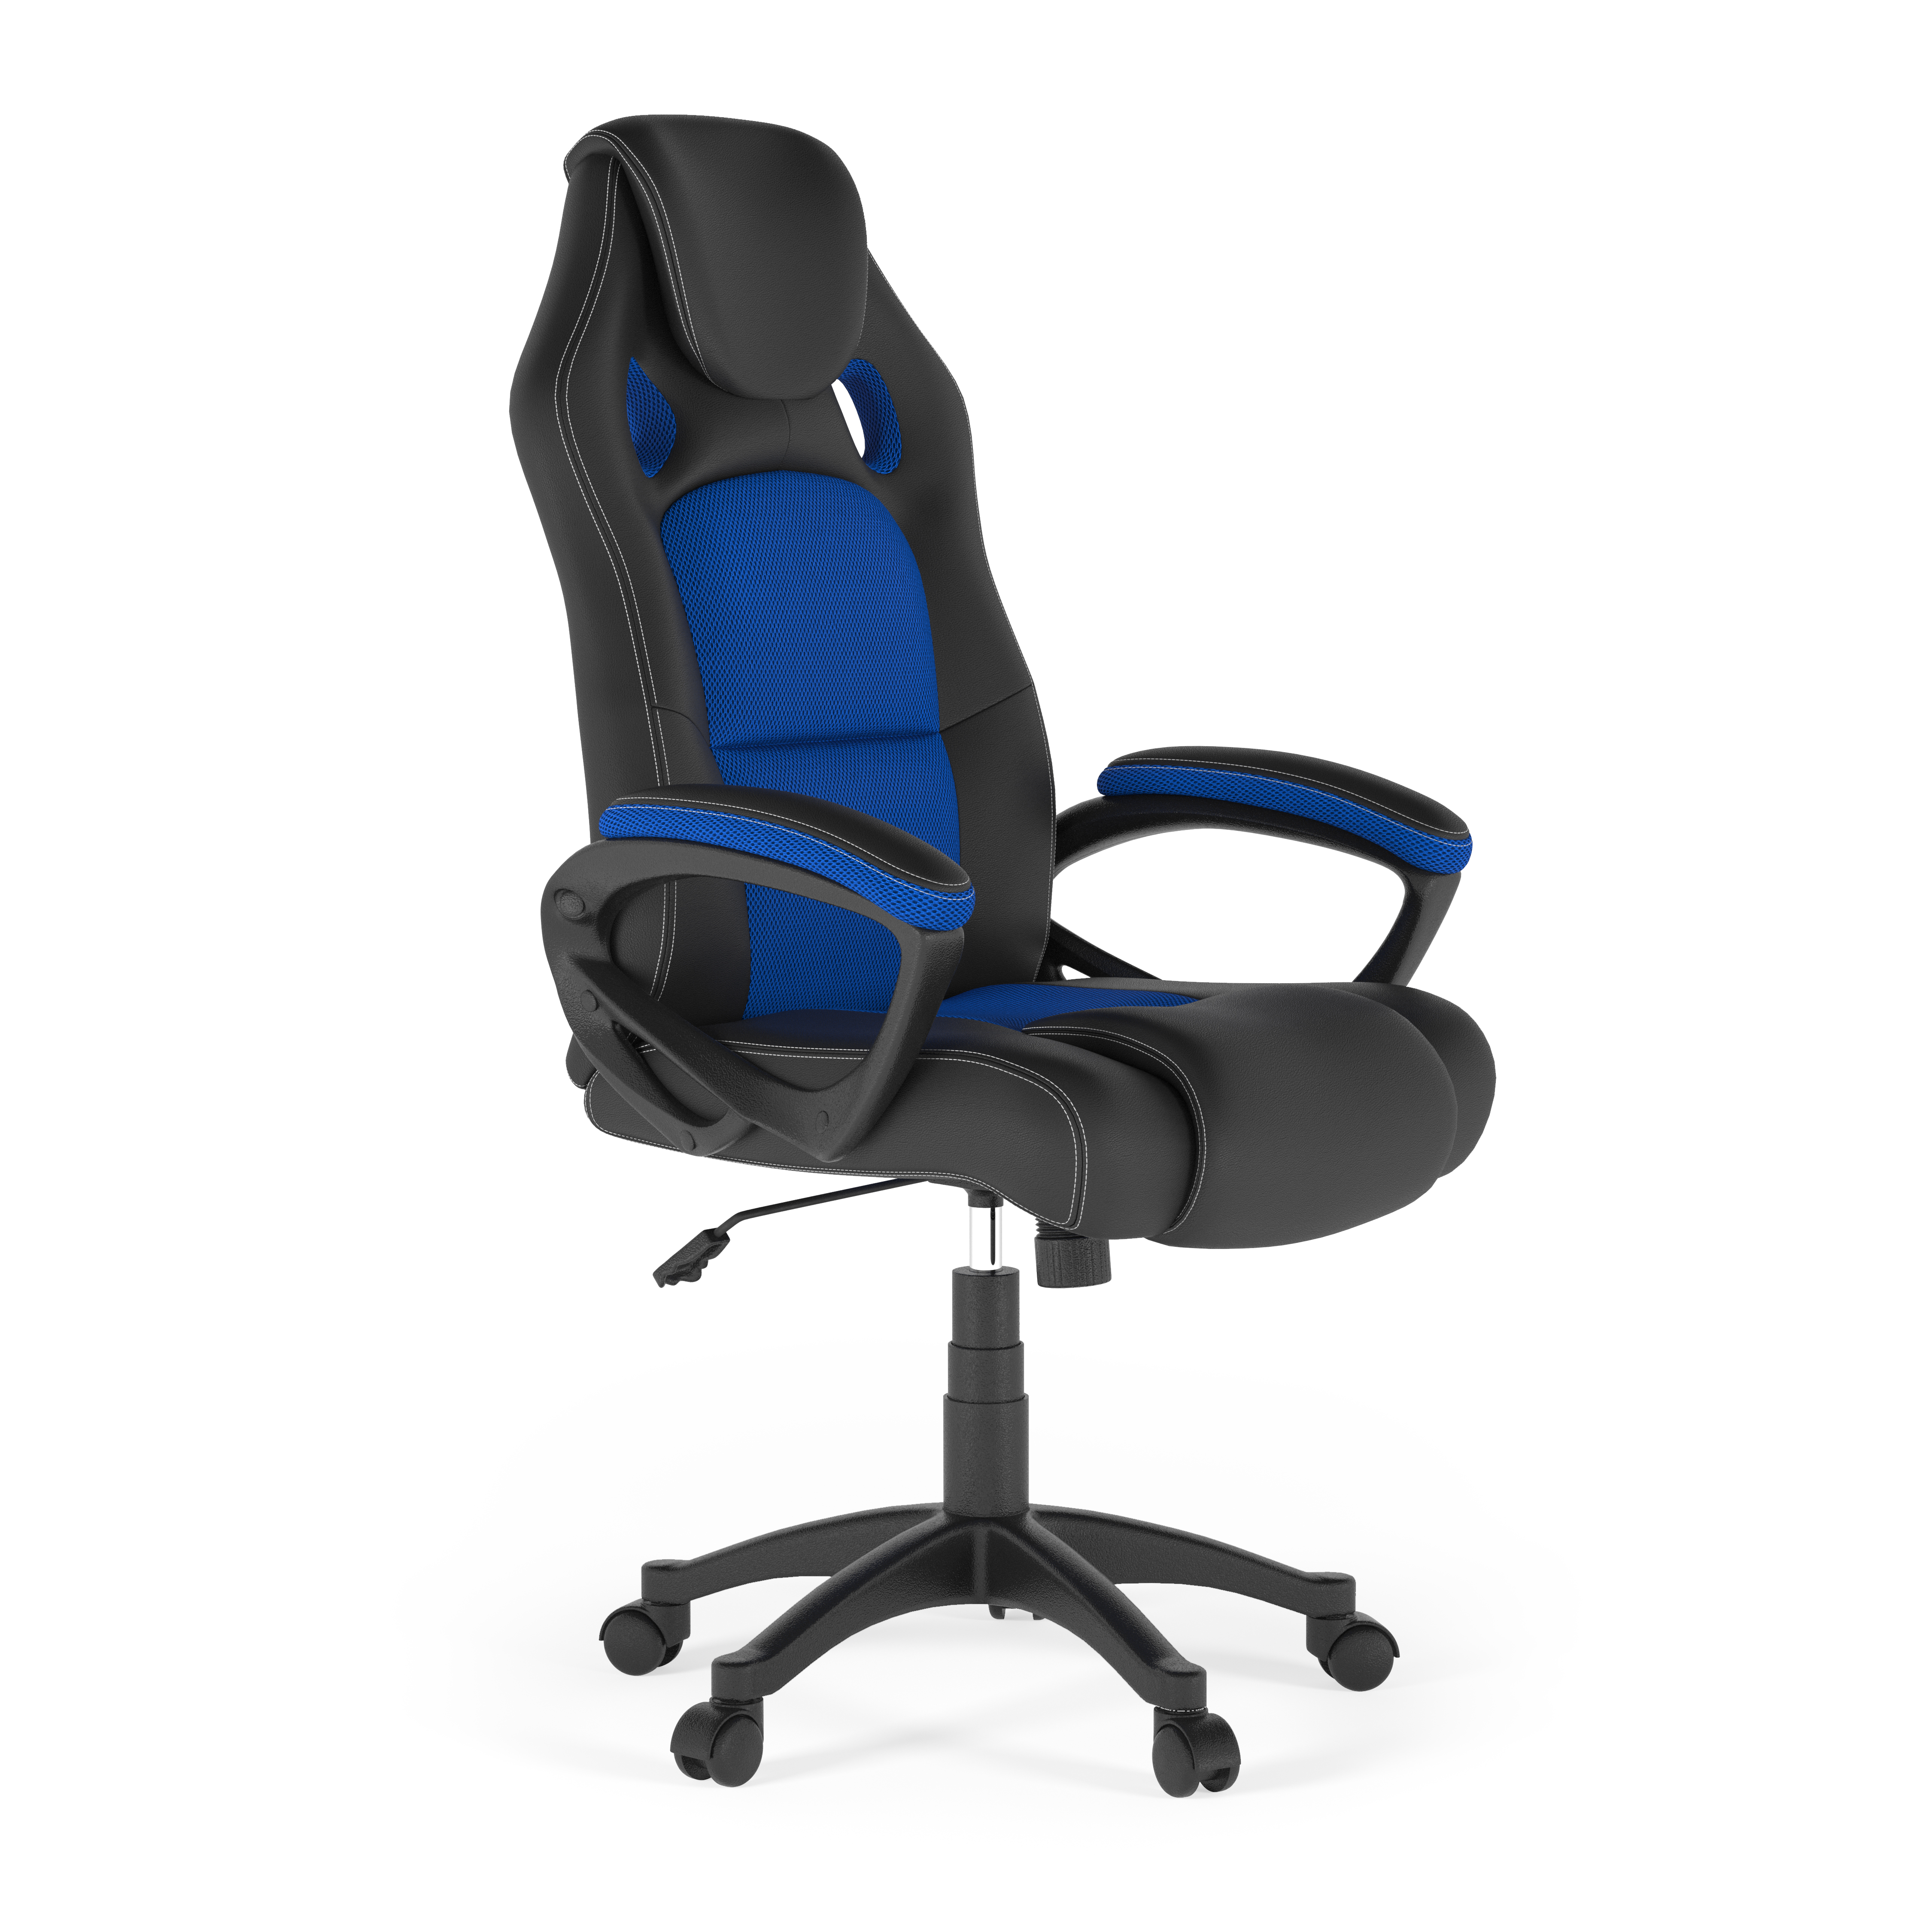 Lifestyle Solutions Akron Gaming Office Chair with Faux Leather, Blue - image 4 of 7